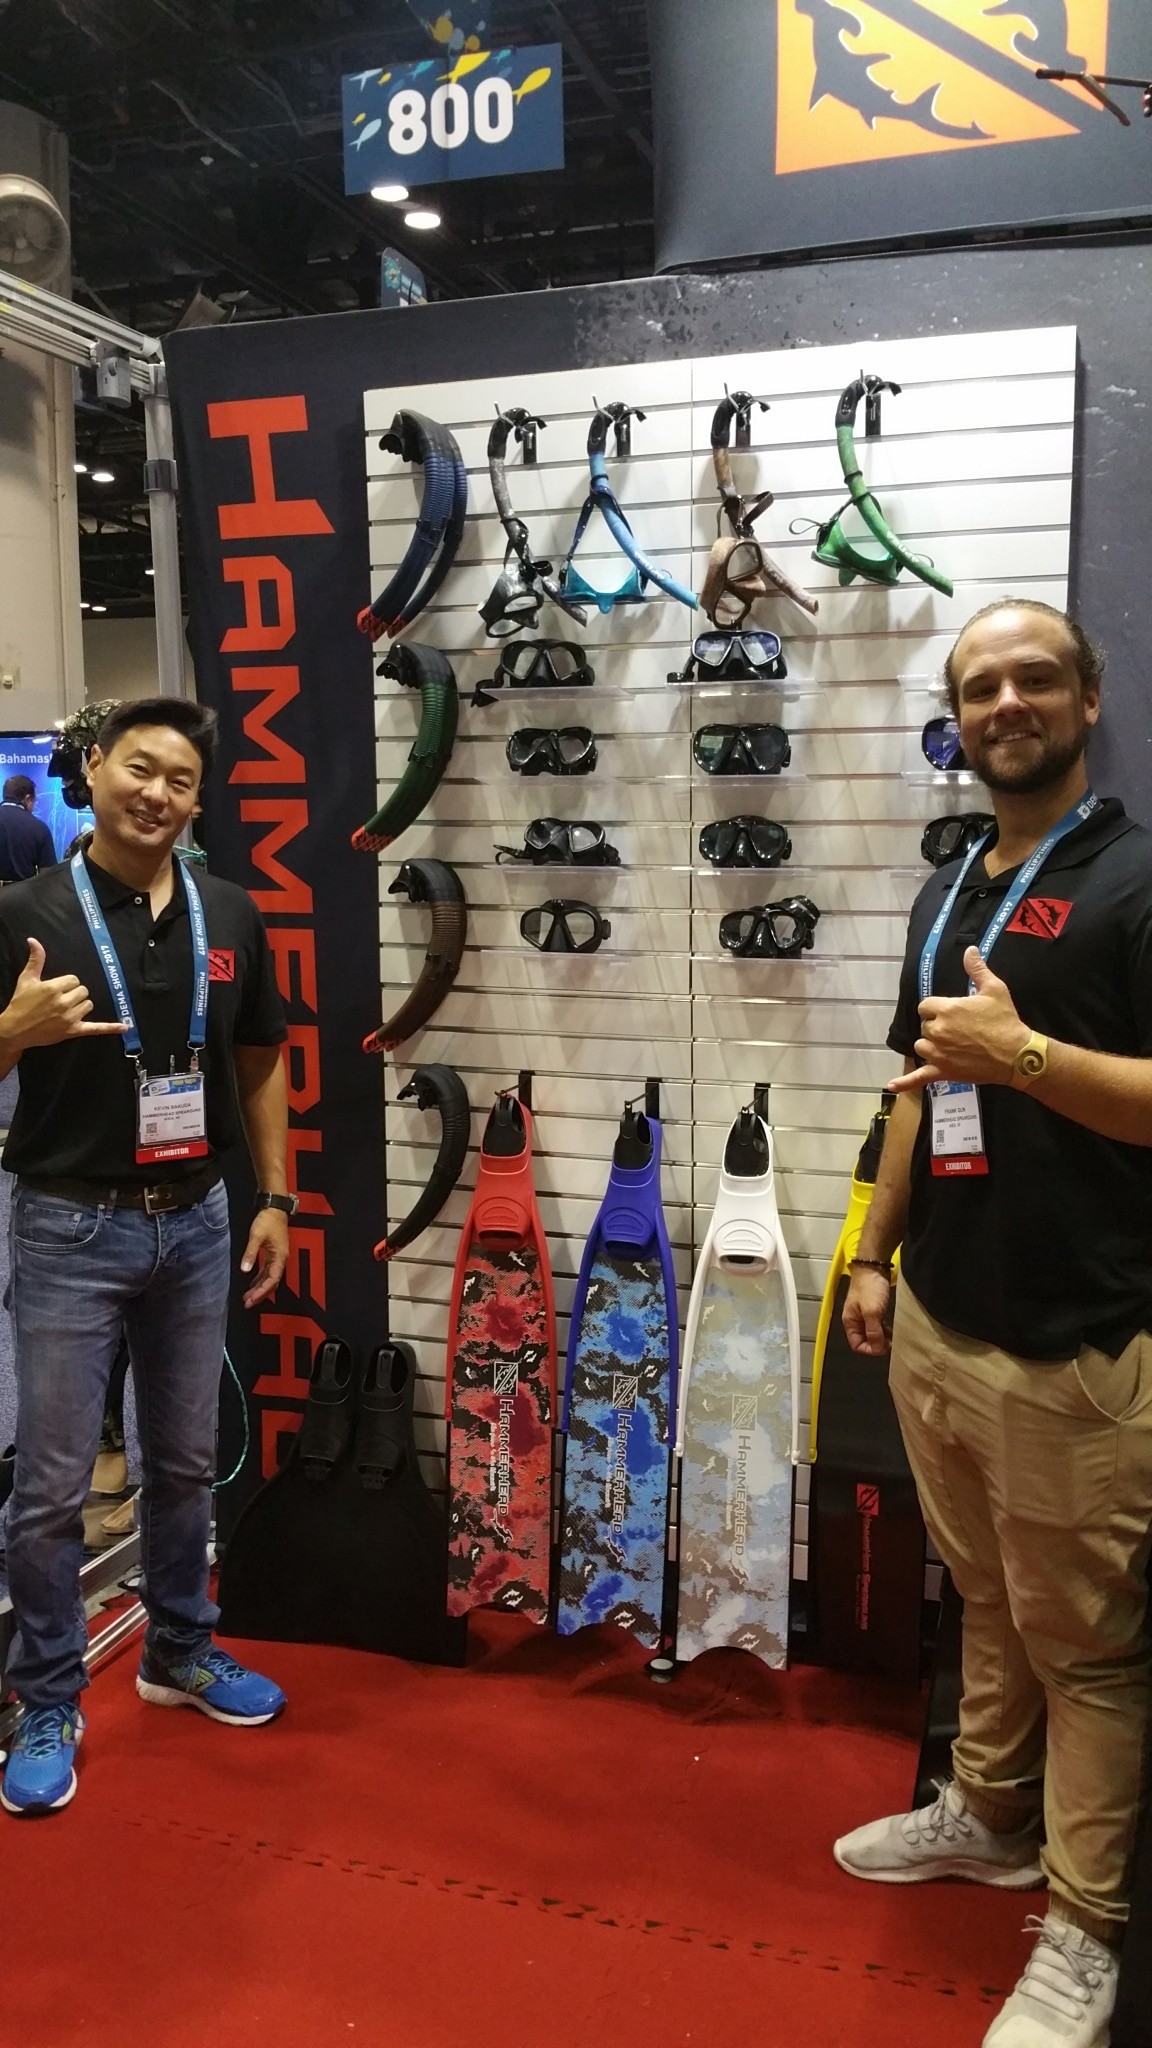 Kevin and Frank display hyrdo-dipped masks/snorkels and colorful fins